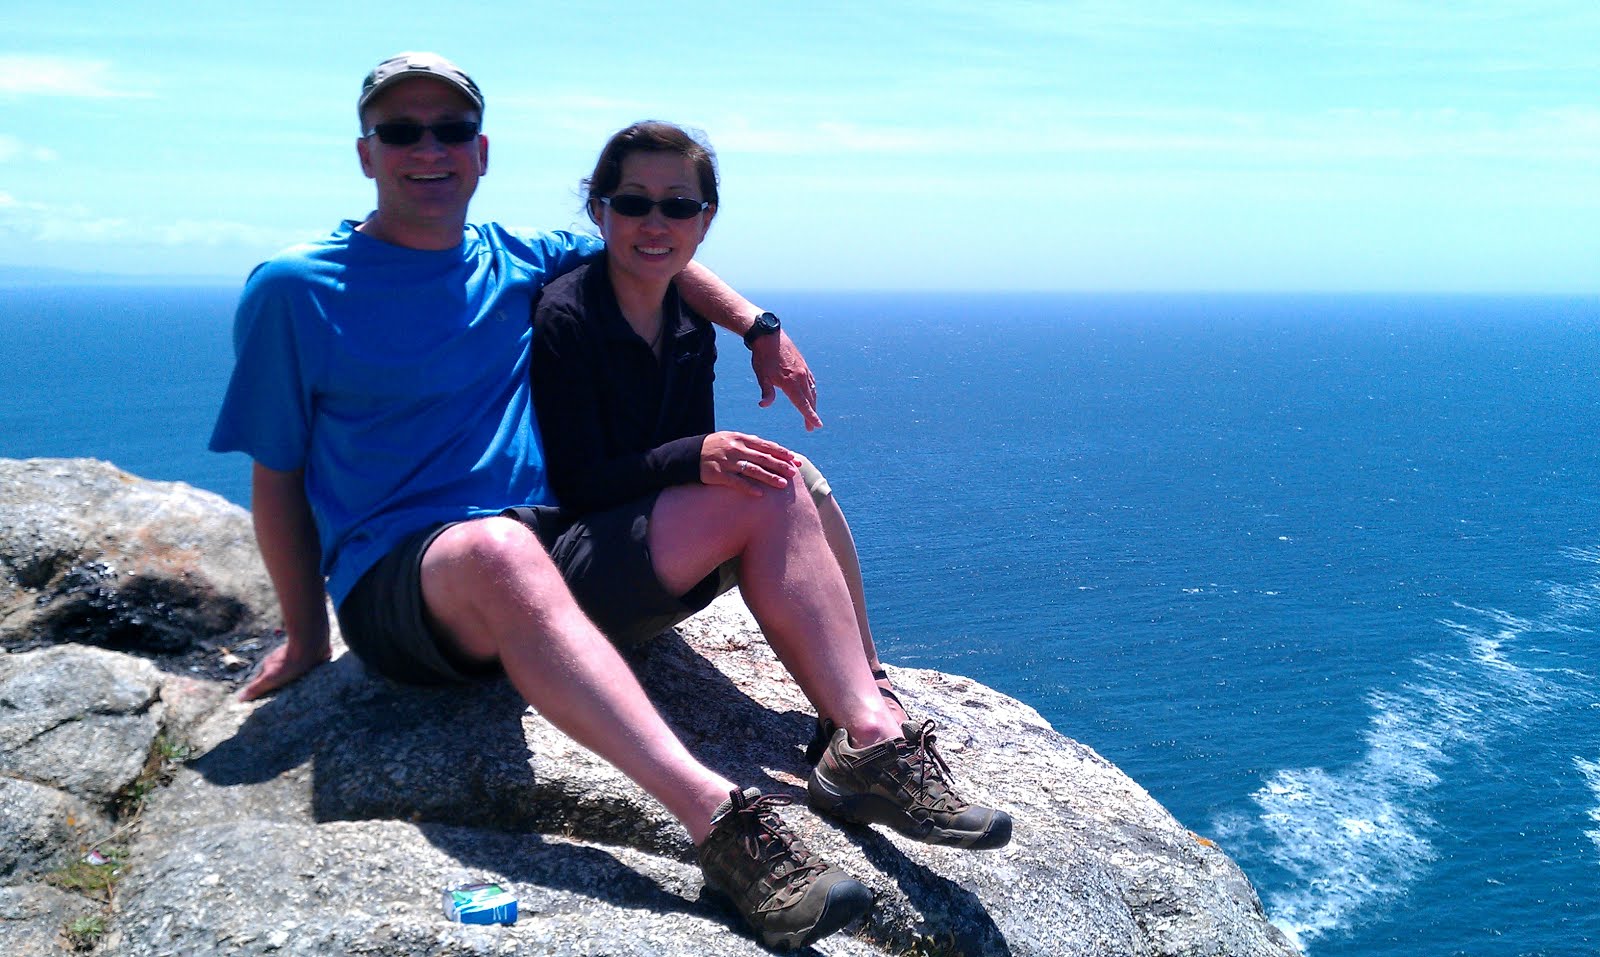 Will and Julie at Finisterre, Spain